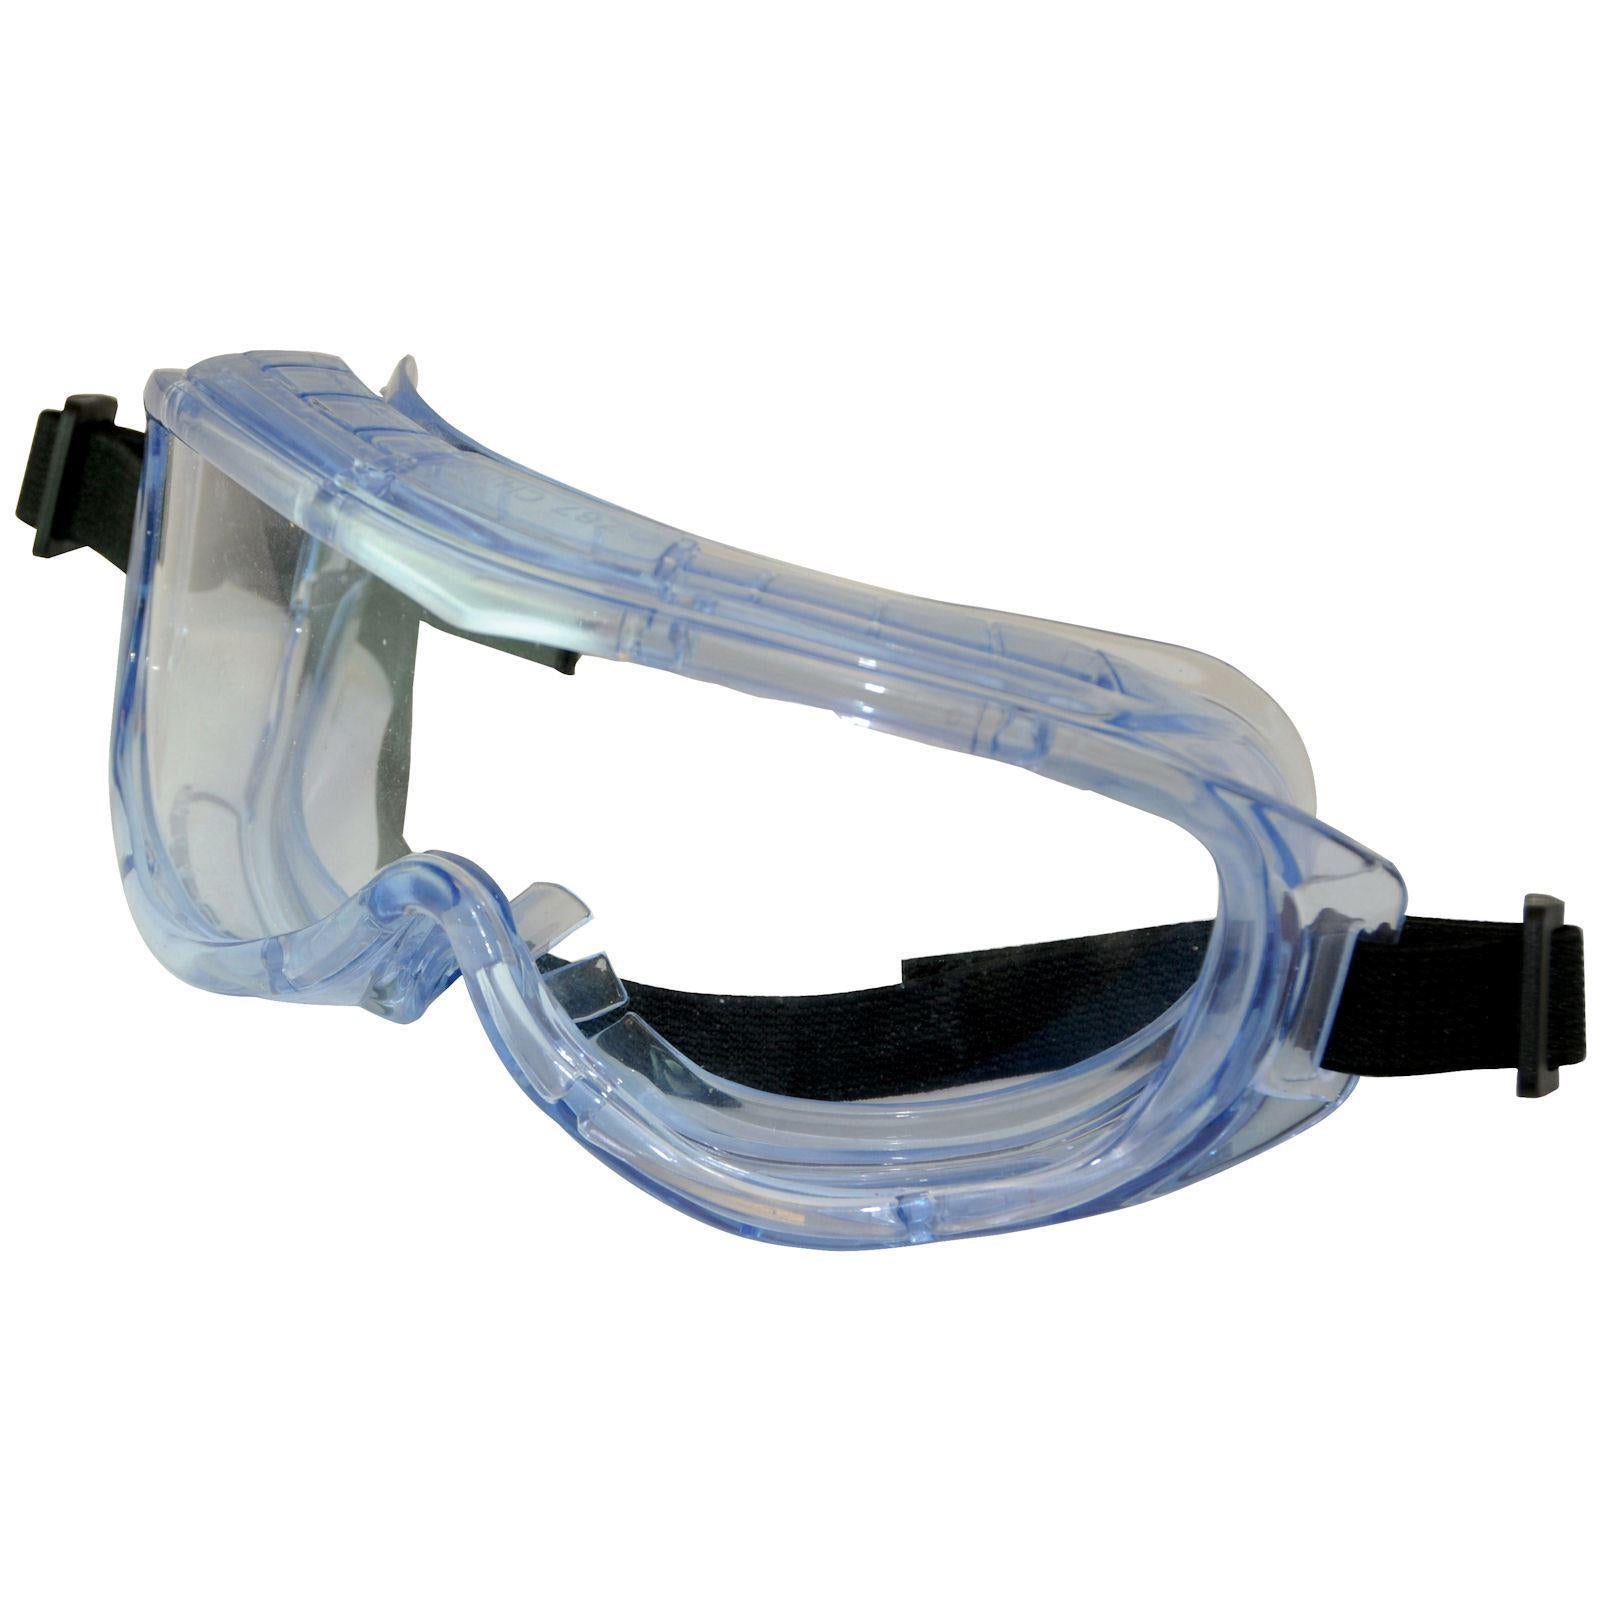 Silverline Panoramic Safety Goggles Clear Lens Adjustable Glasses